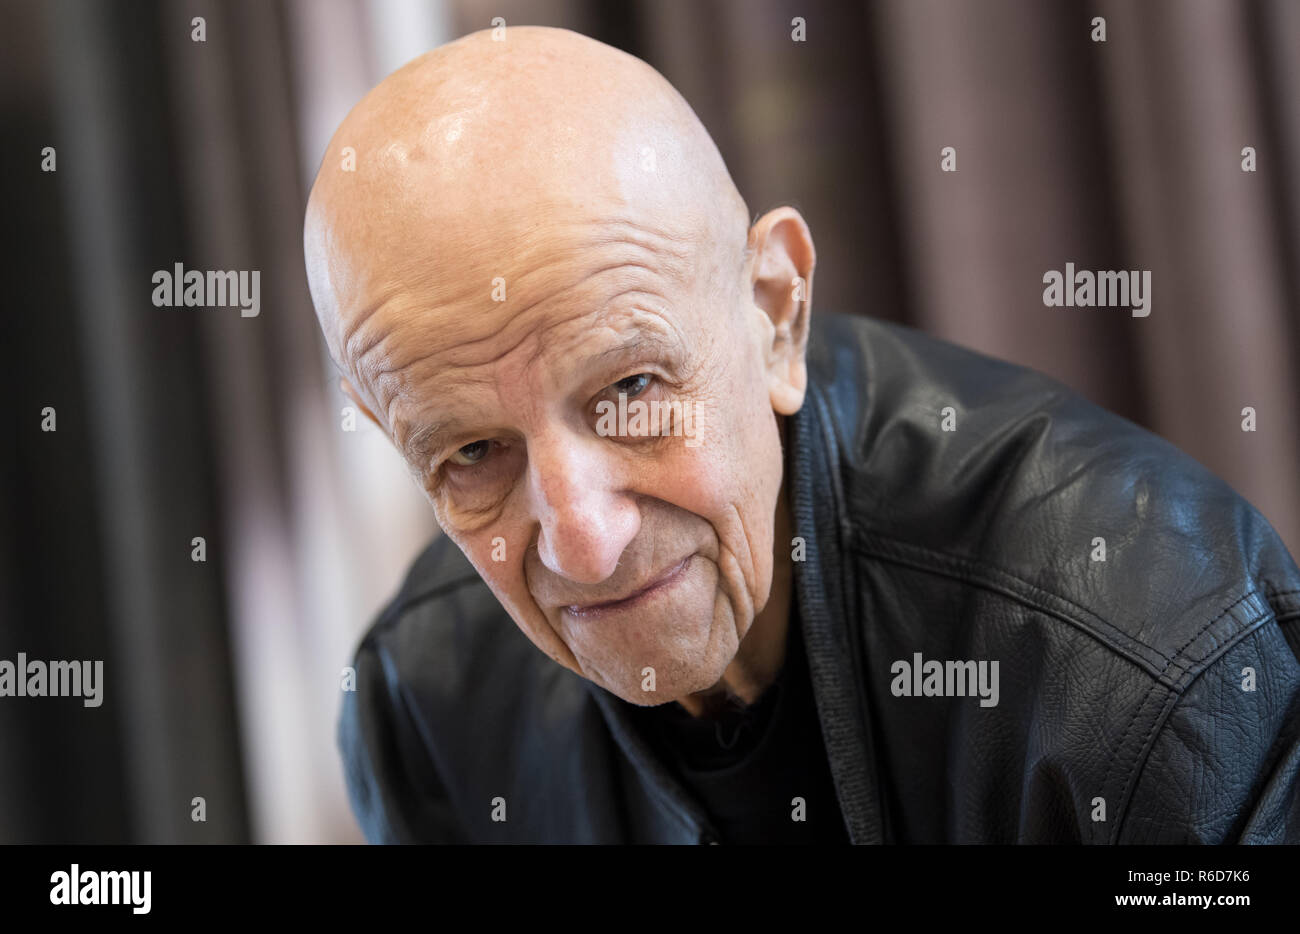 05 December 2018, Bavaria, München: The artist Alex Katz takes part in a  press conference at the Museum Brandhorst during a press preview of the  retrospective "Alex Katz". The exhibition "Alex Katz"